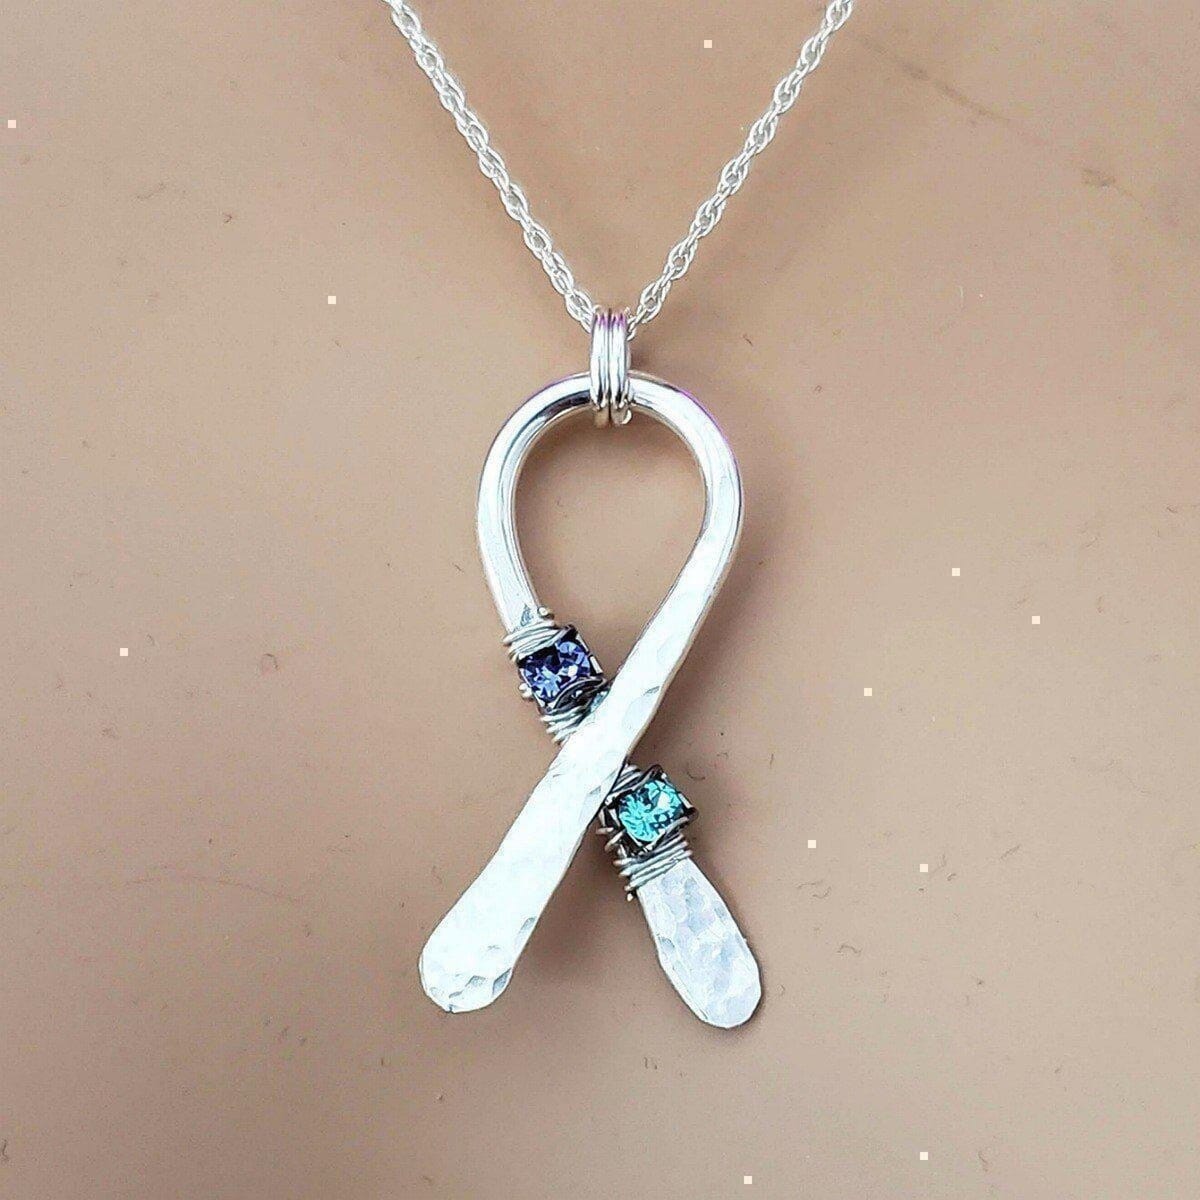 Cancer, Cancer Gifts, Breast Cancer, Survivor, Cancer Jewelry, Breast Cancer  Necklace, Breast Cancer Awareness - Clayfuffles - Craftfoxes